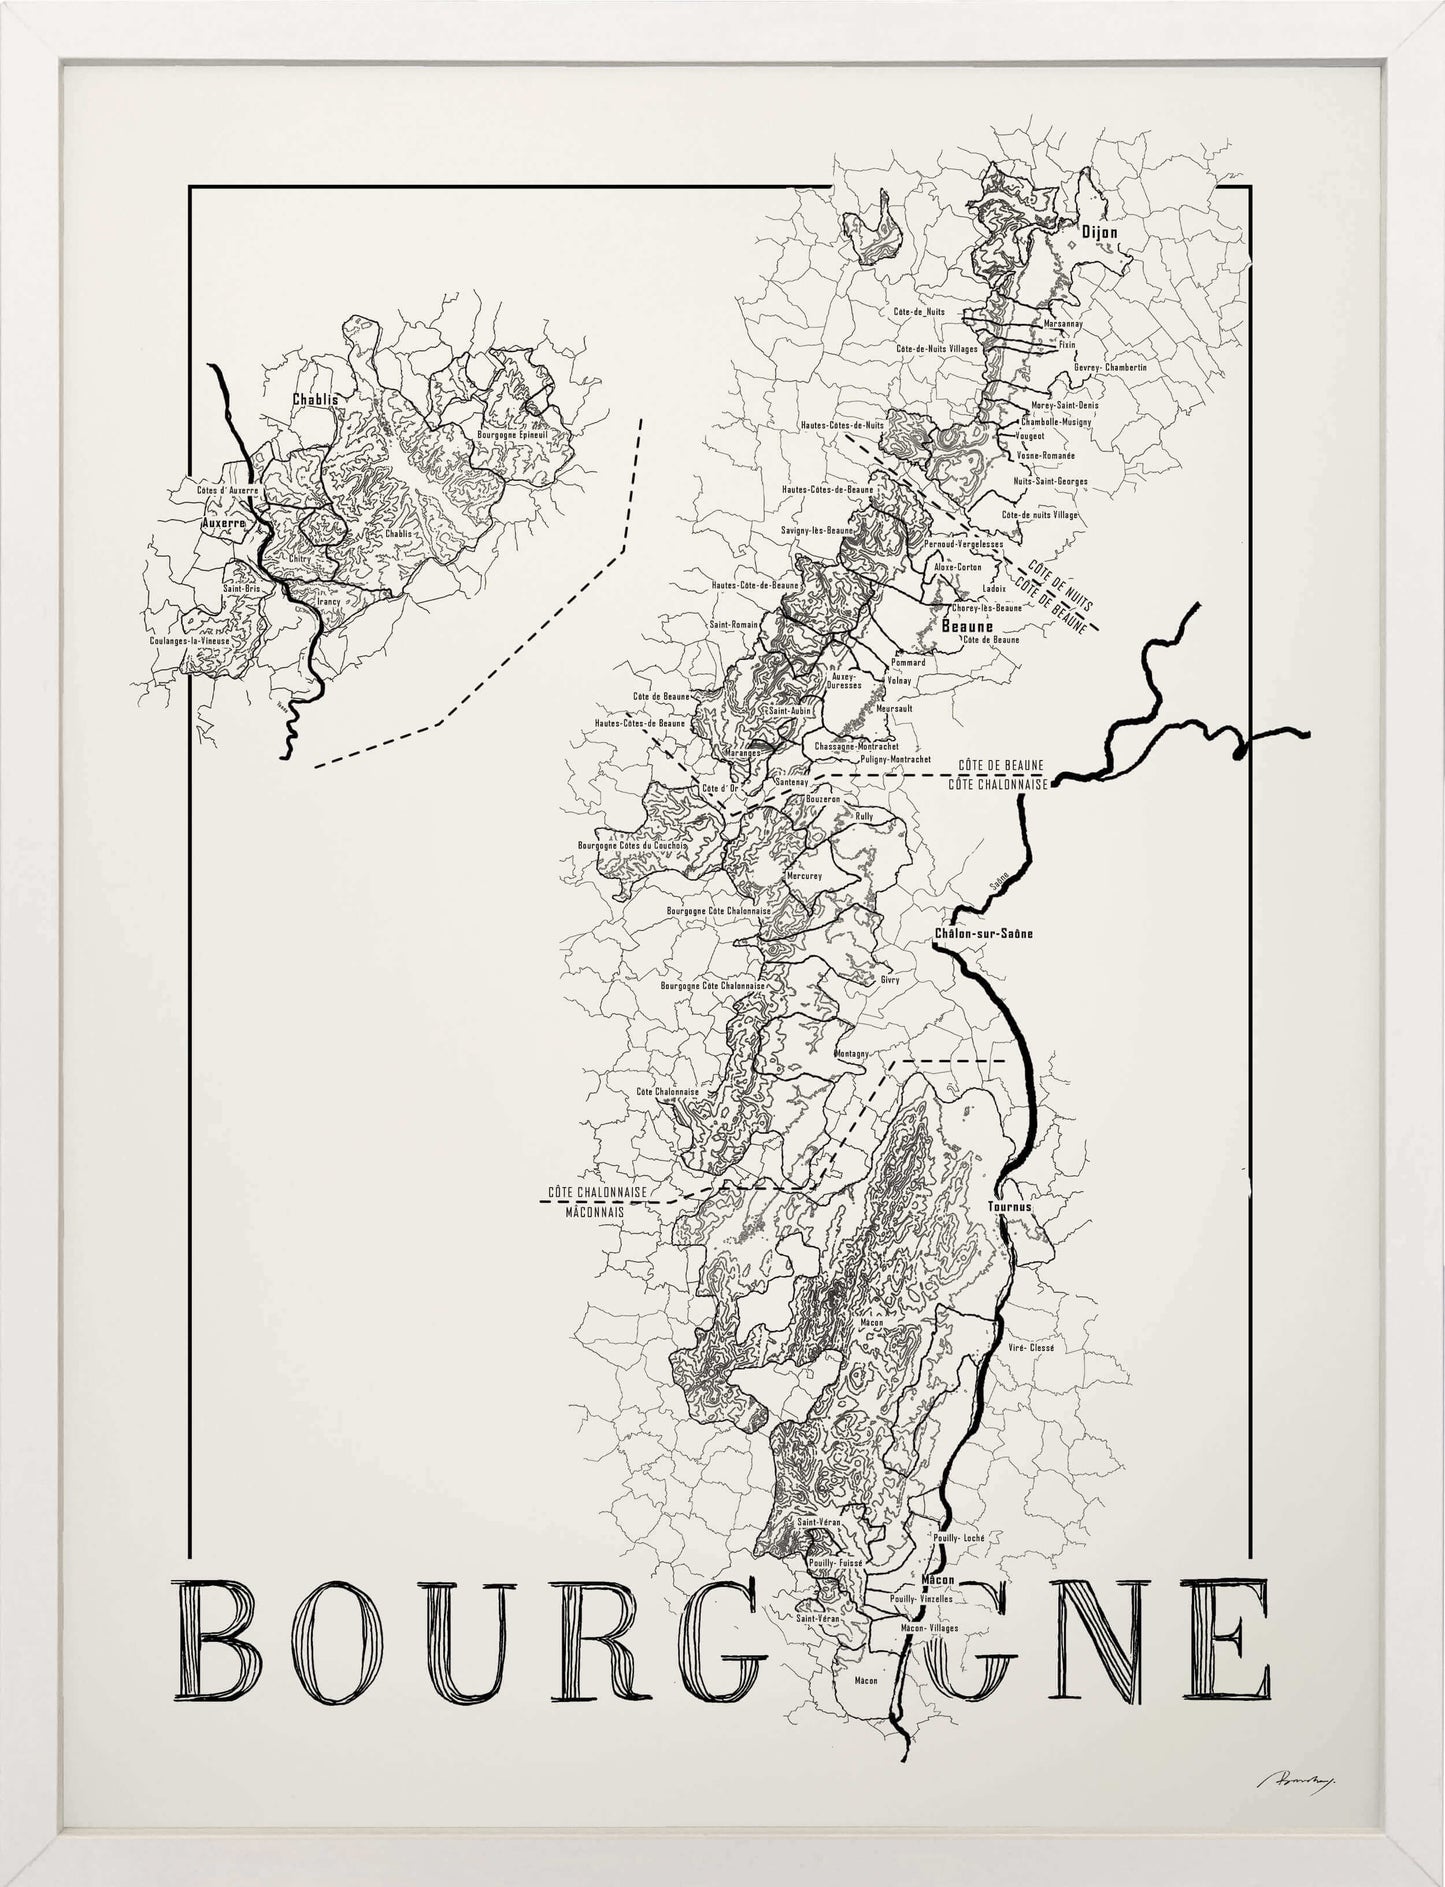 Bourgogne Wine map poster. Exclusive wine map posters. Premium quality wine maps printed on environmentally friendly FSC marked paper. 